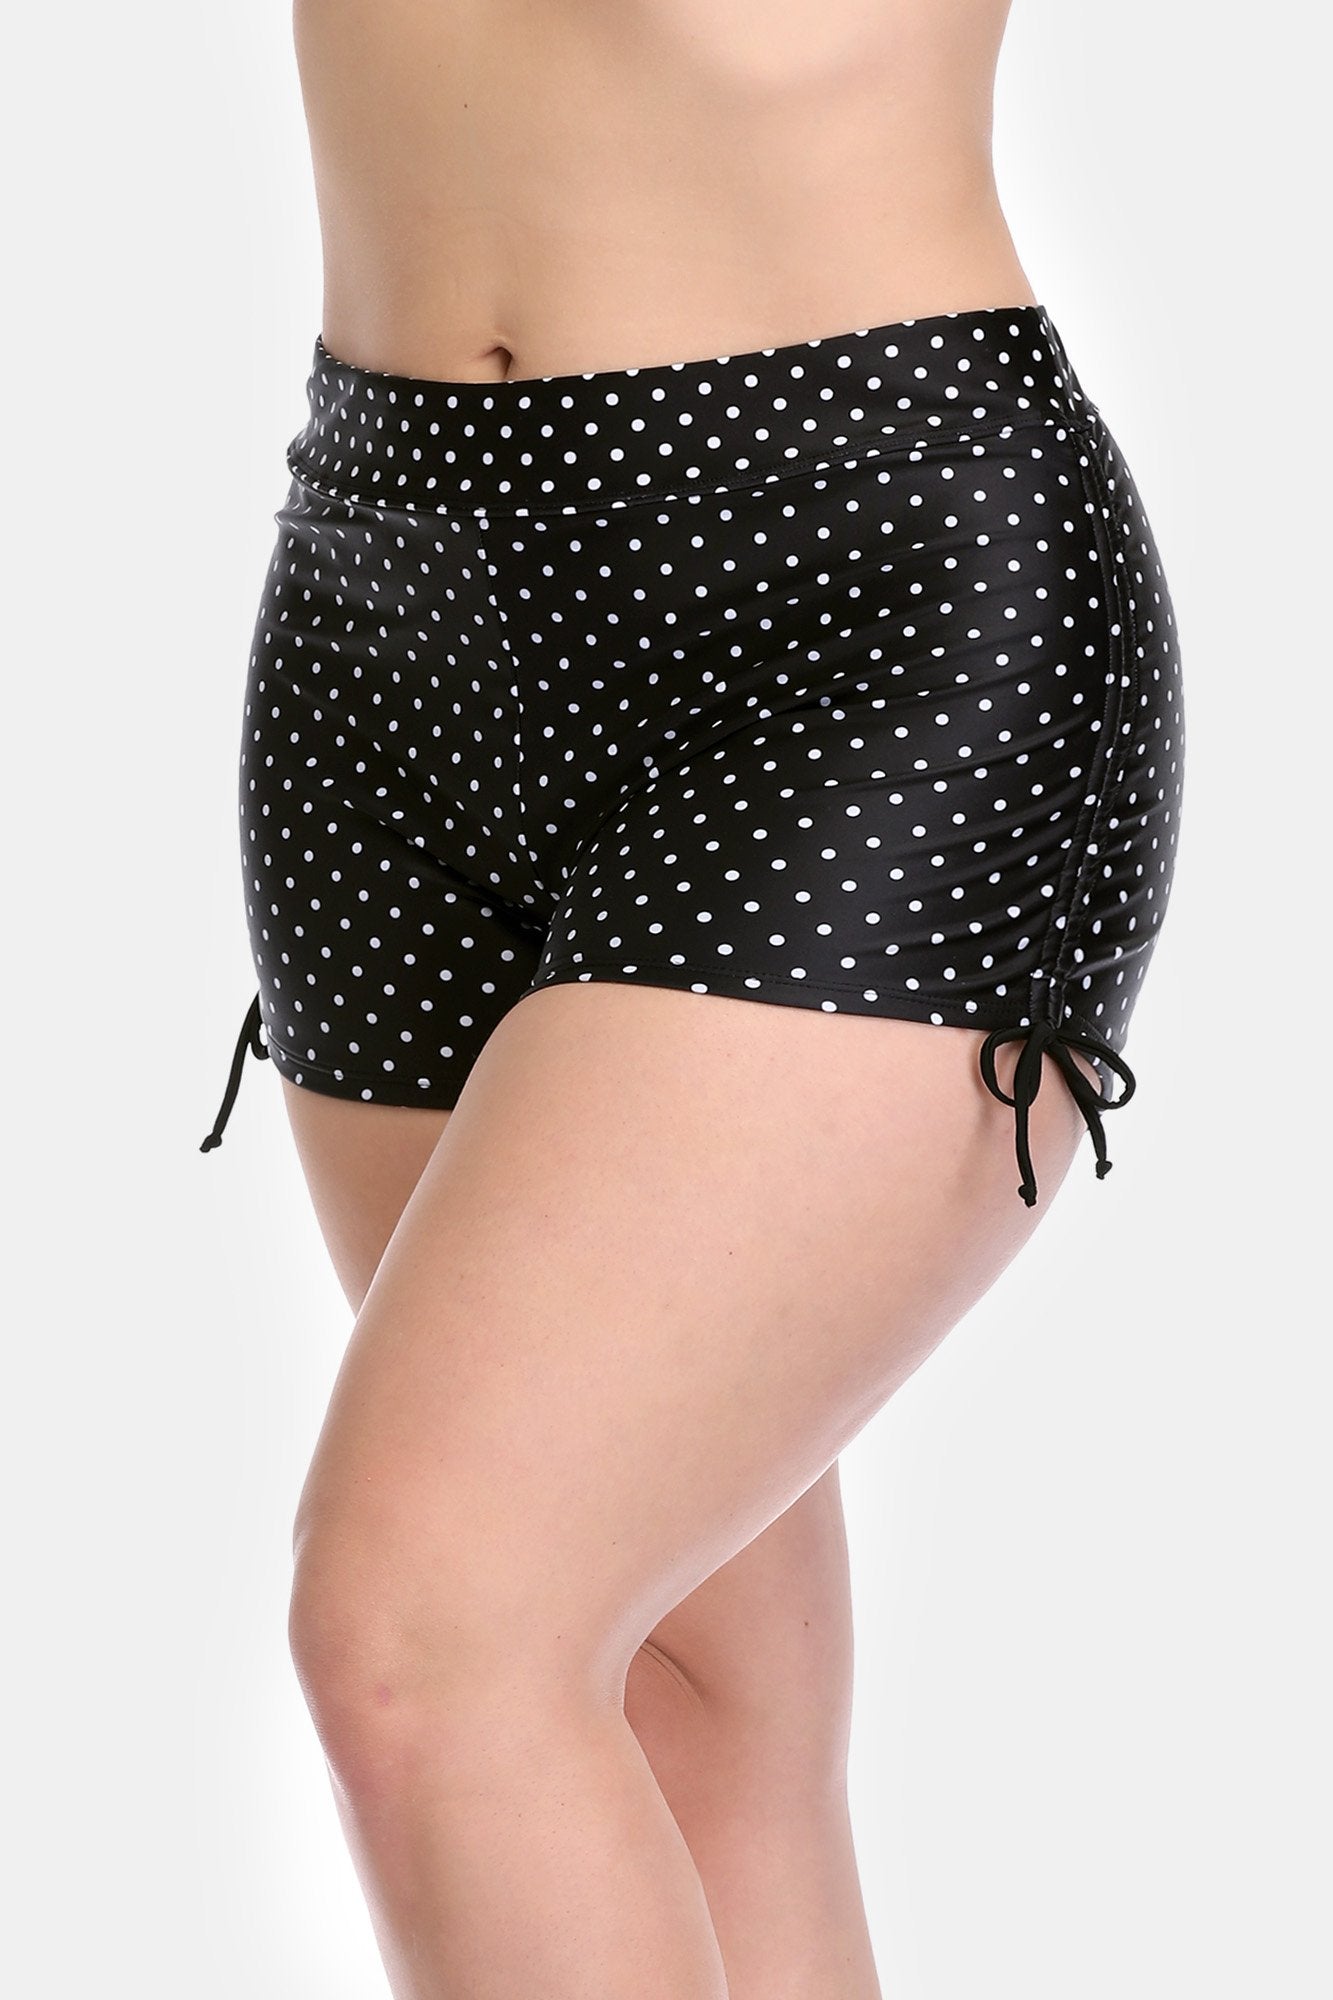  ALove High Waisted Women Swim Shorts Adjustable Drawstring  Elastic Board Shorts Built-in Brief Black : Clothing, Shoes & Jewelry